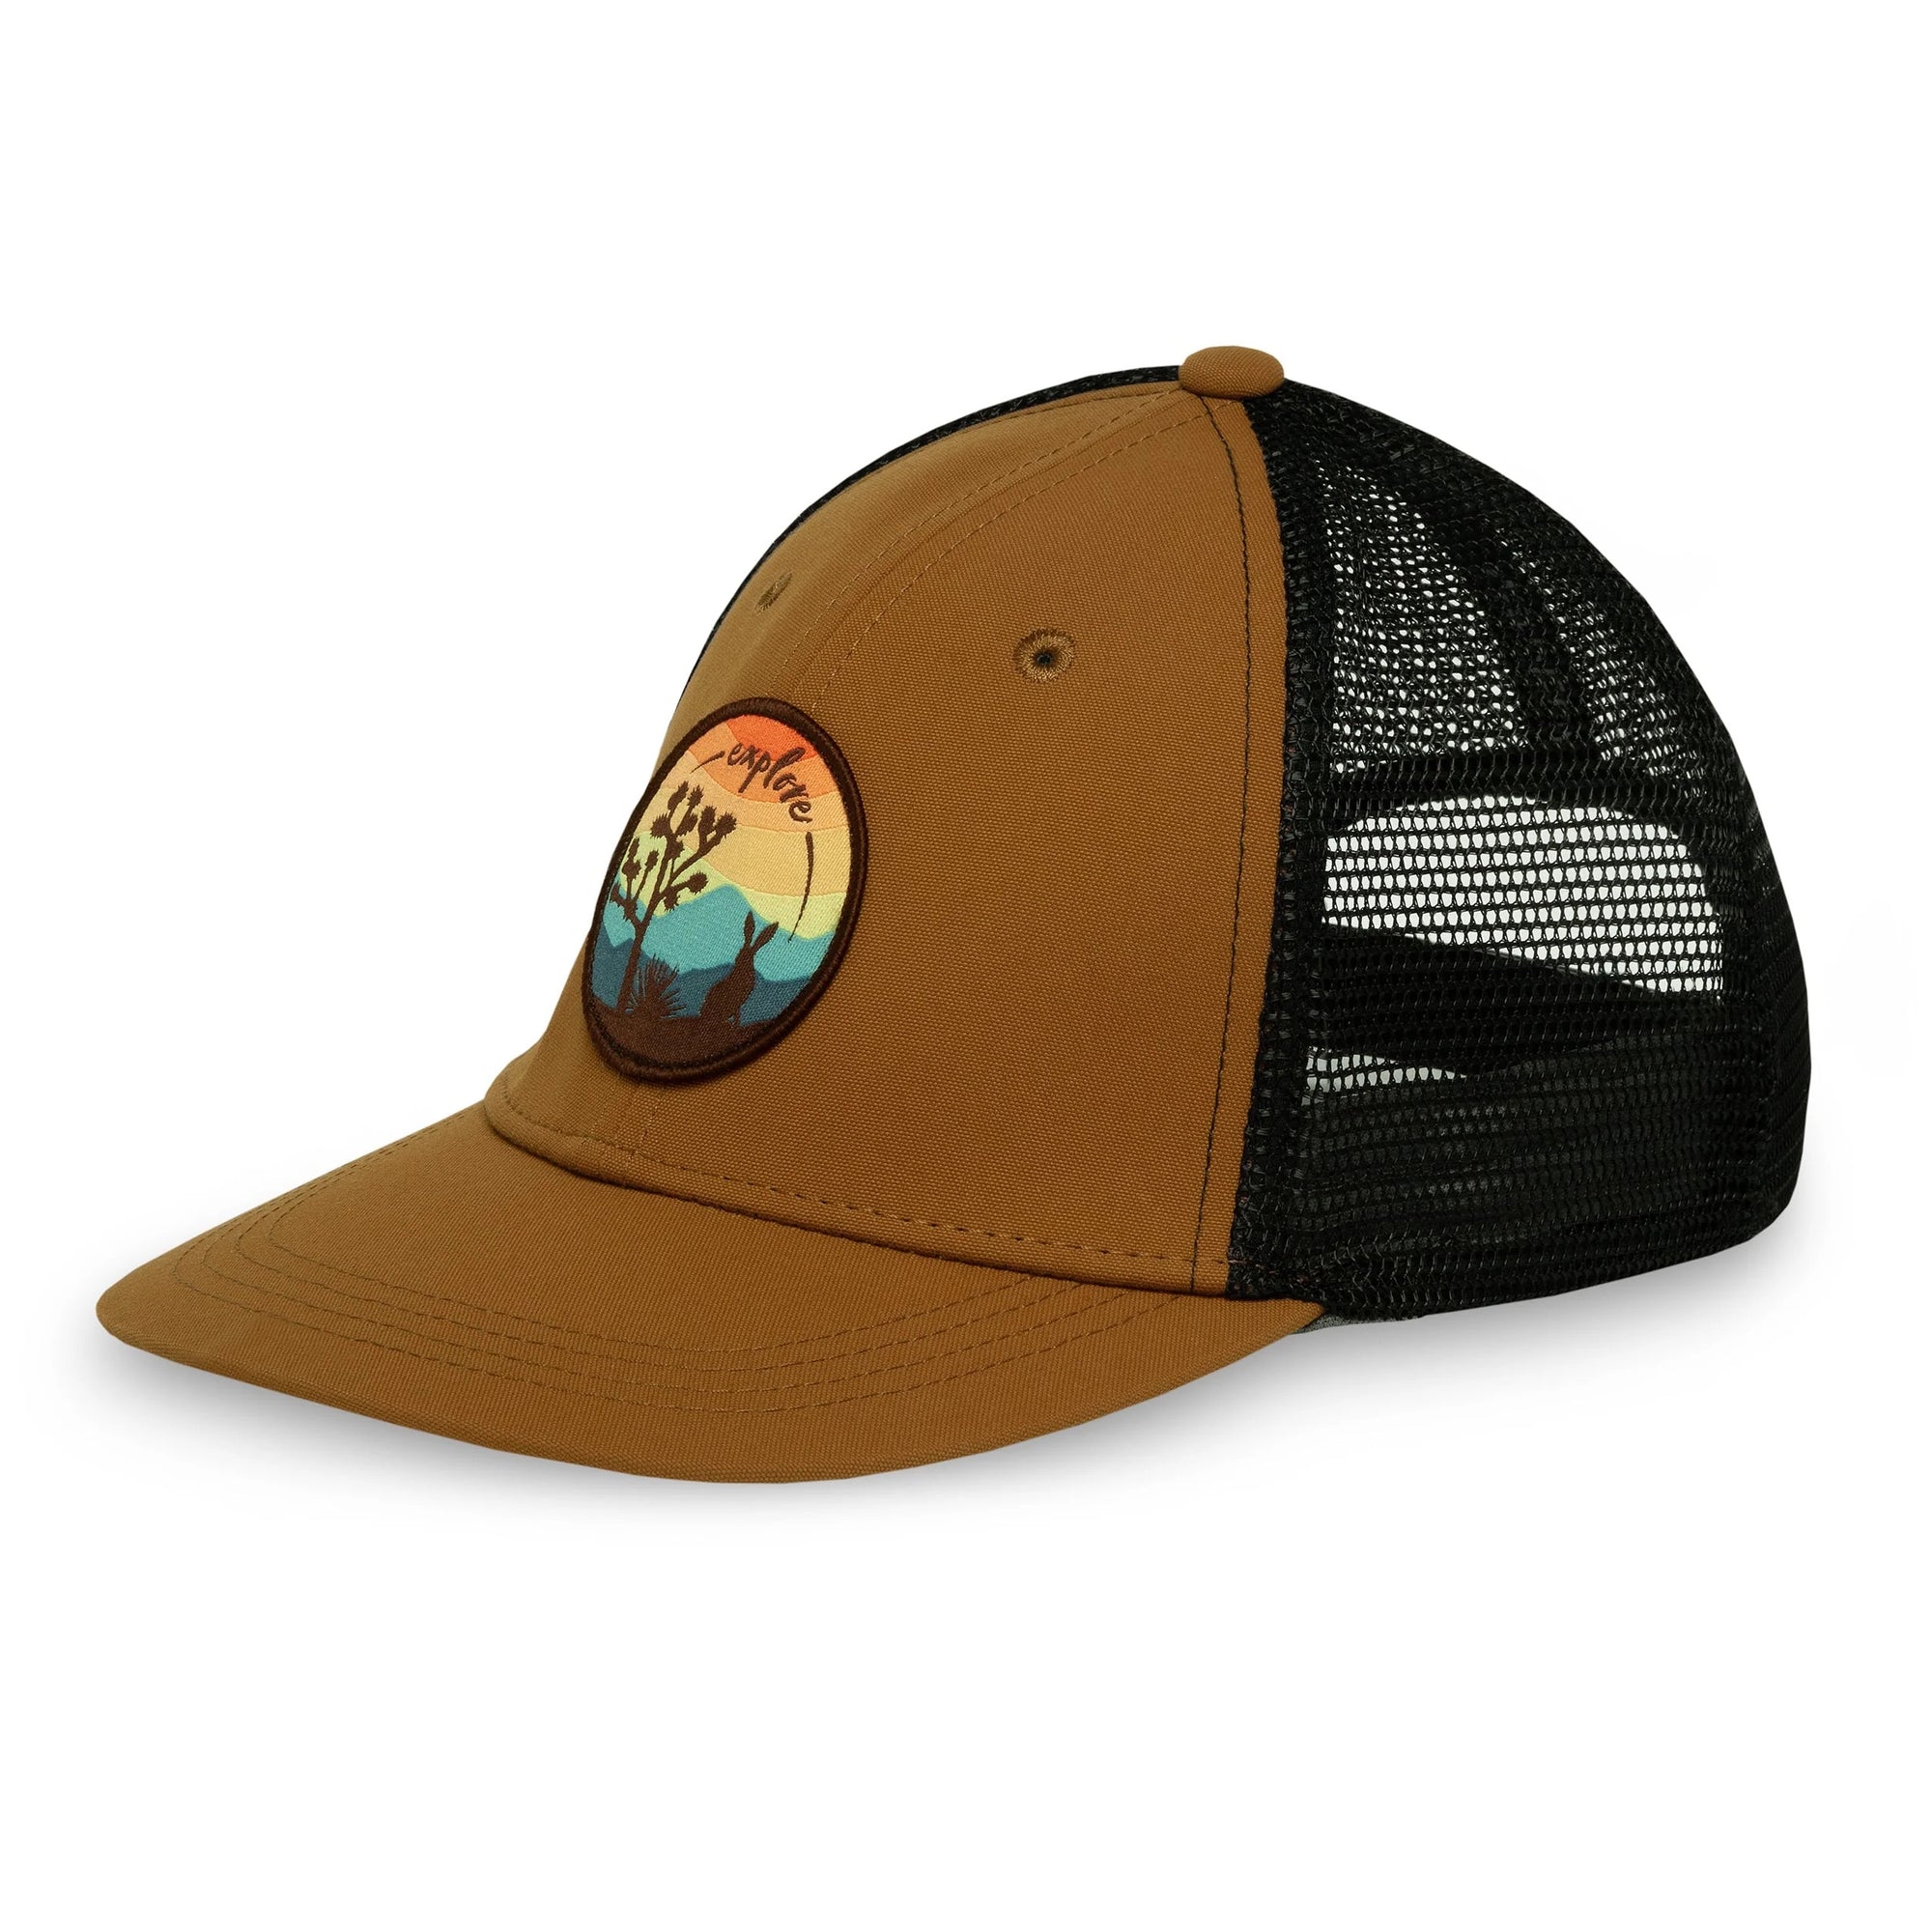 Sunday Afternoons Kids' Trucker Hat - Explore M/L